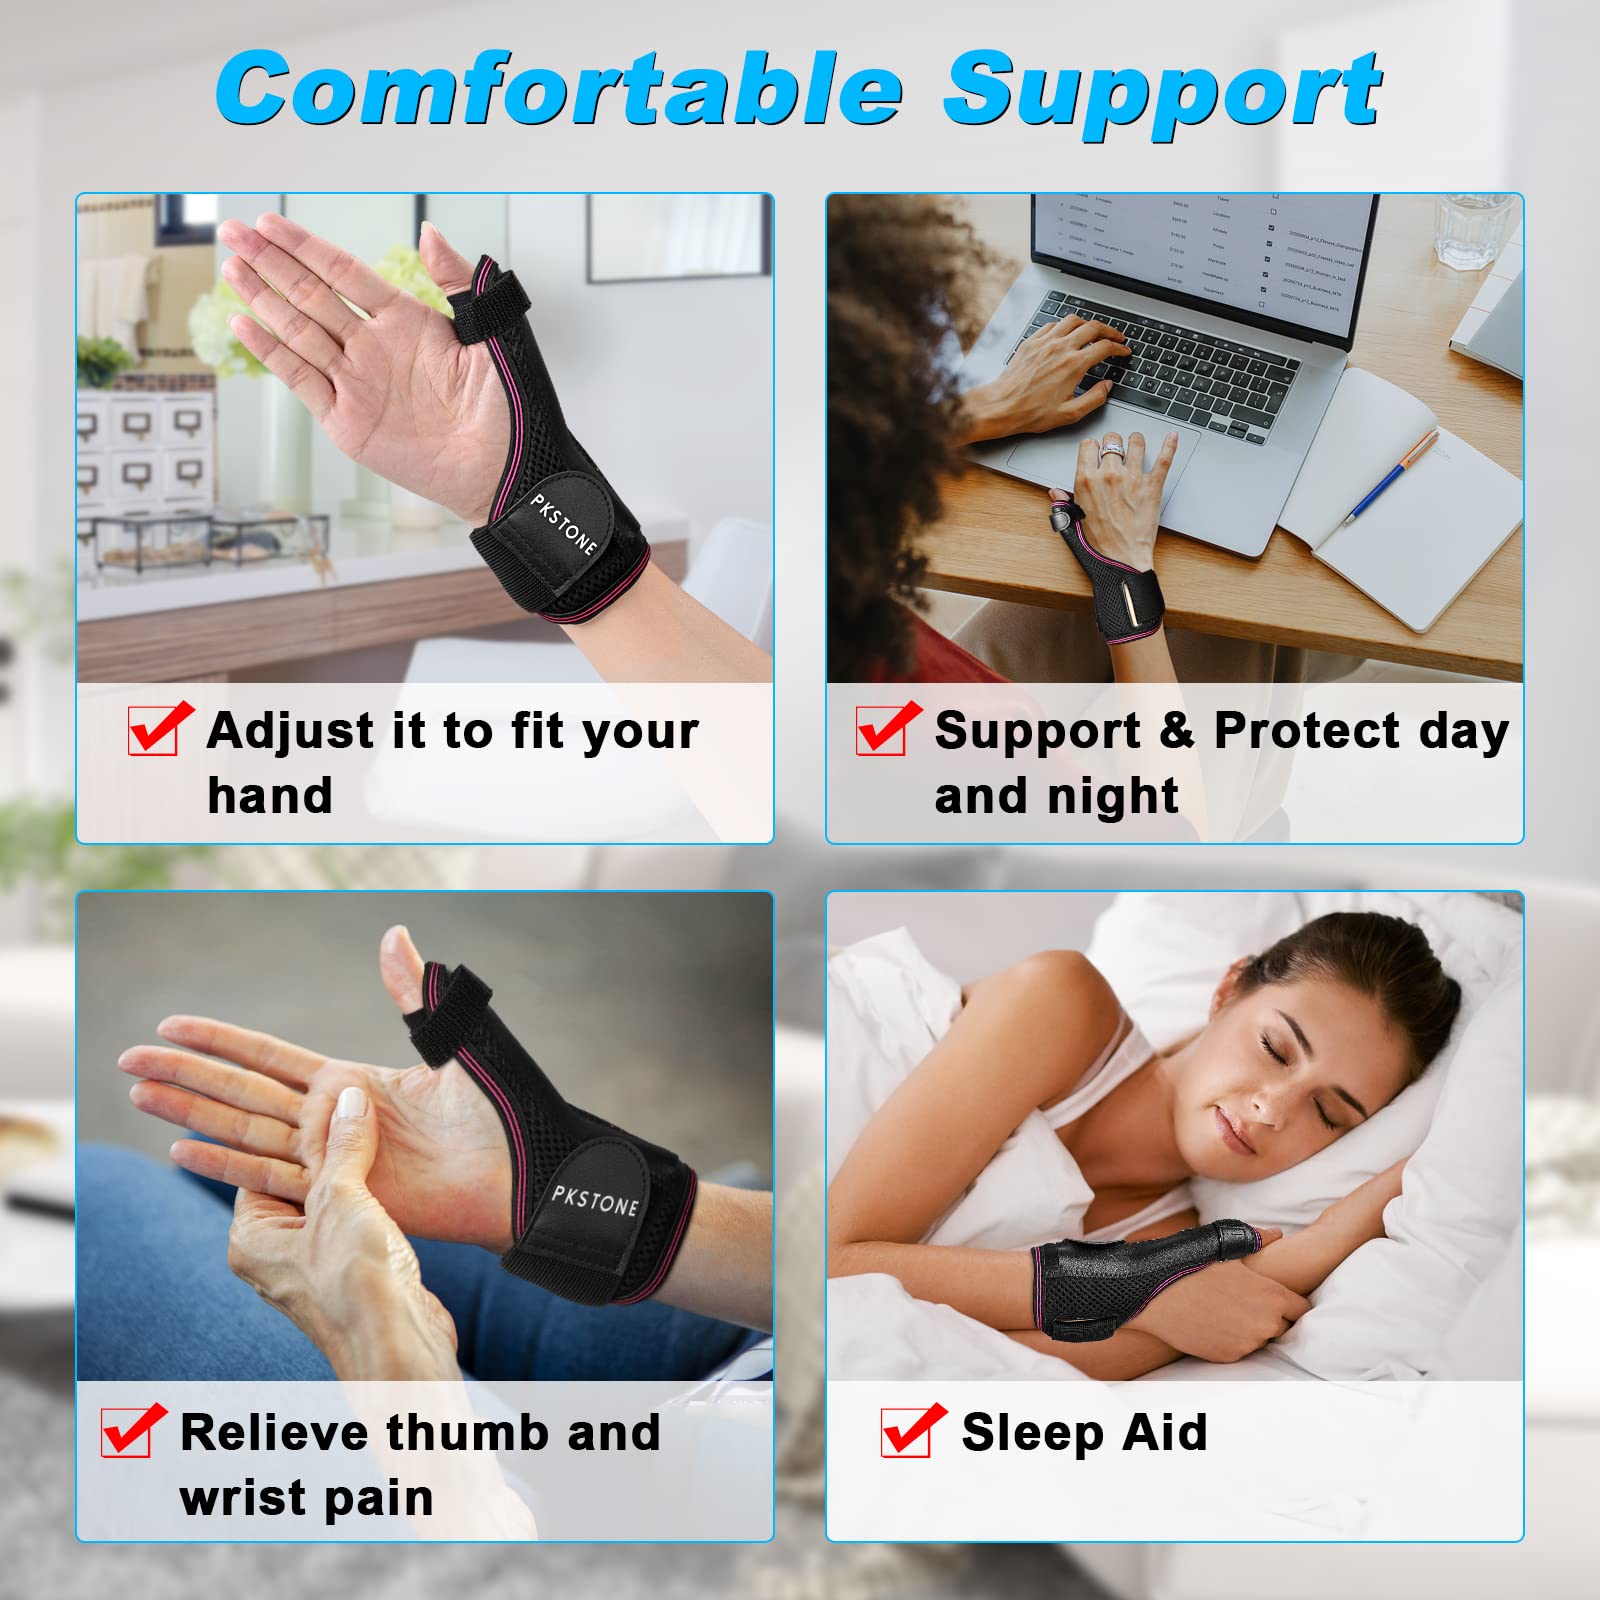 Wrist Splint for Carpal-Tunnel Syndrome, Adjustable Compression Wrist Brace for Right and Left Hand, Pain Relief for Arthritis, Tendonitis, Sprains